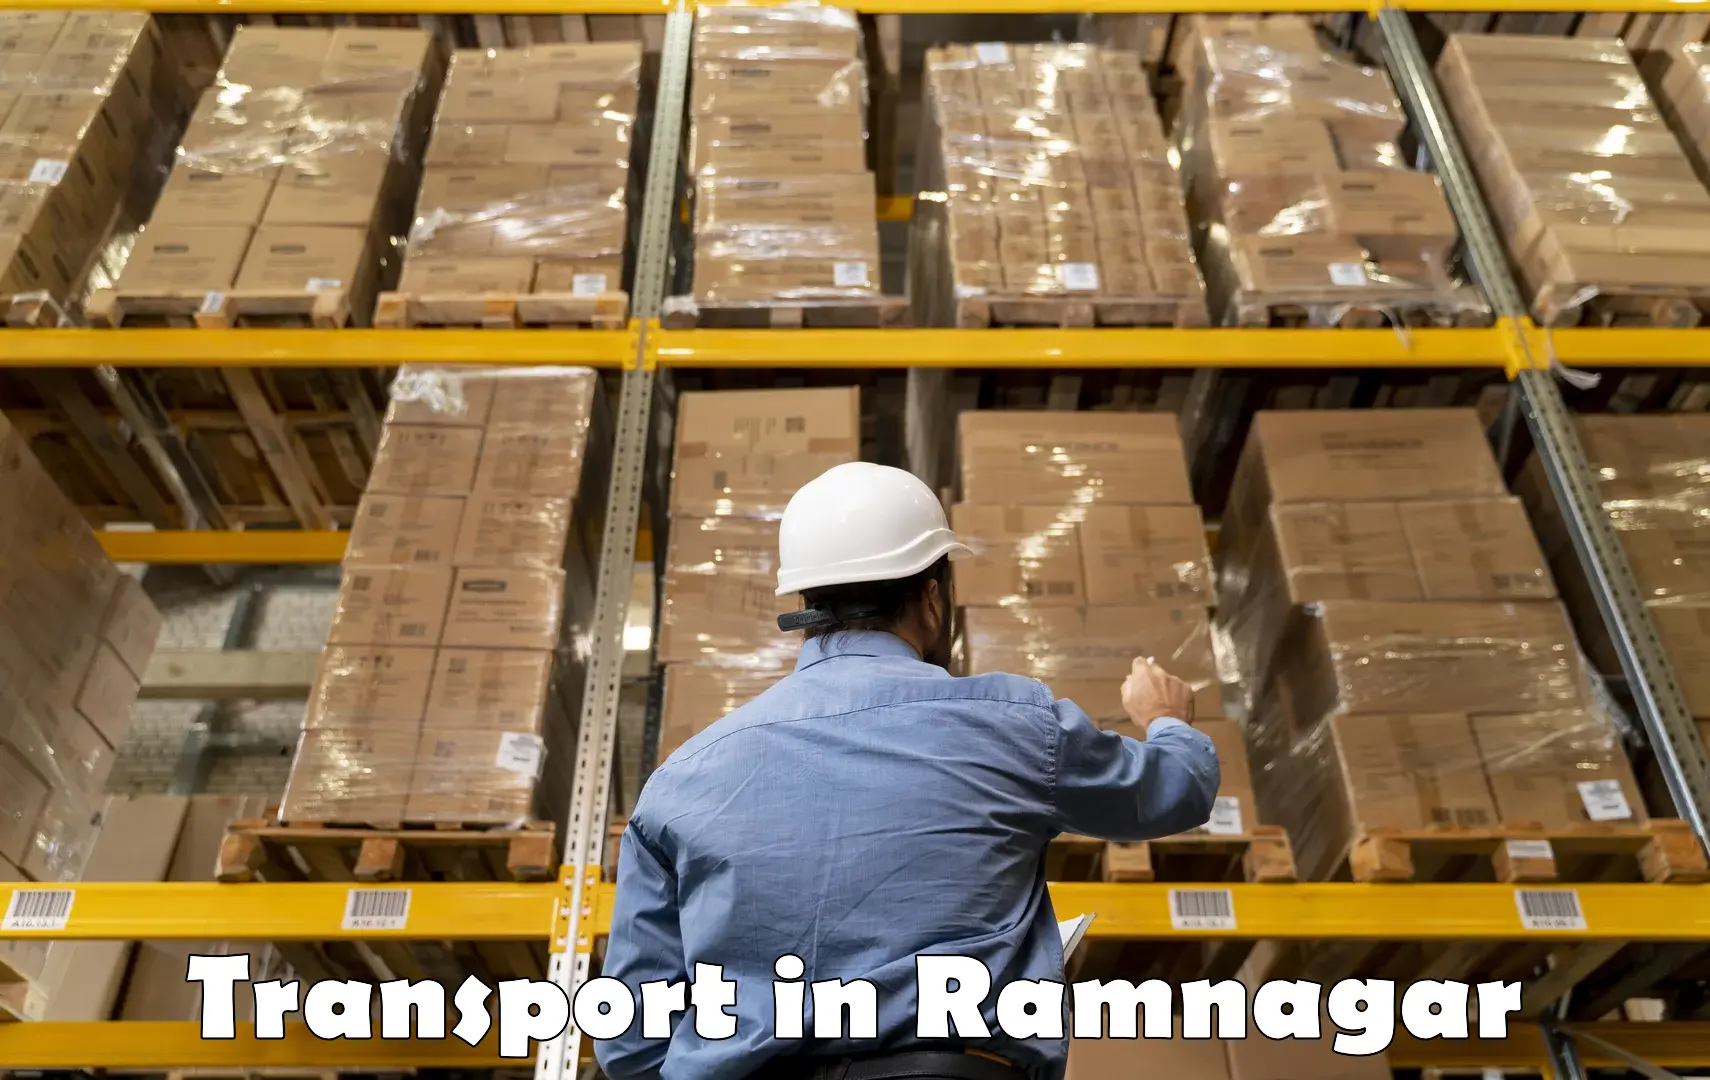 Daily parcel service transport in Ramnagar